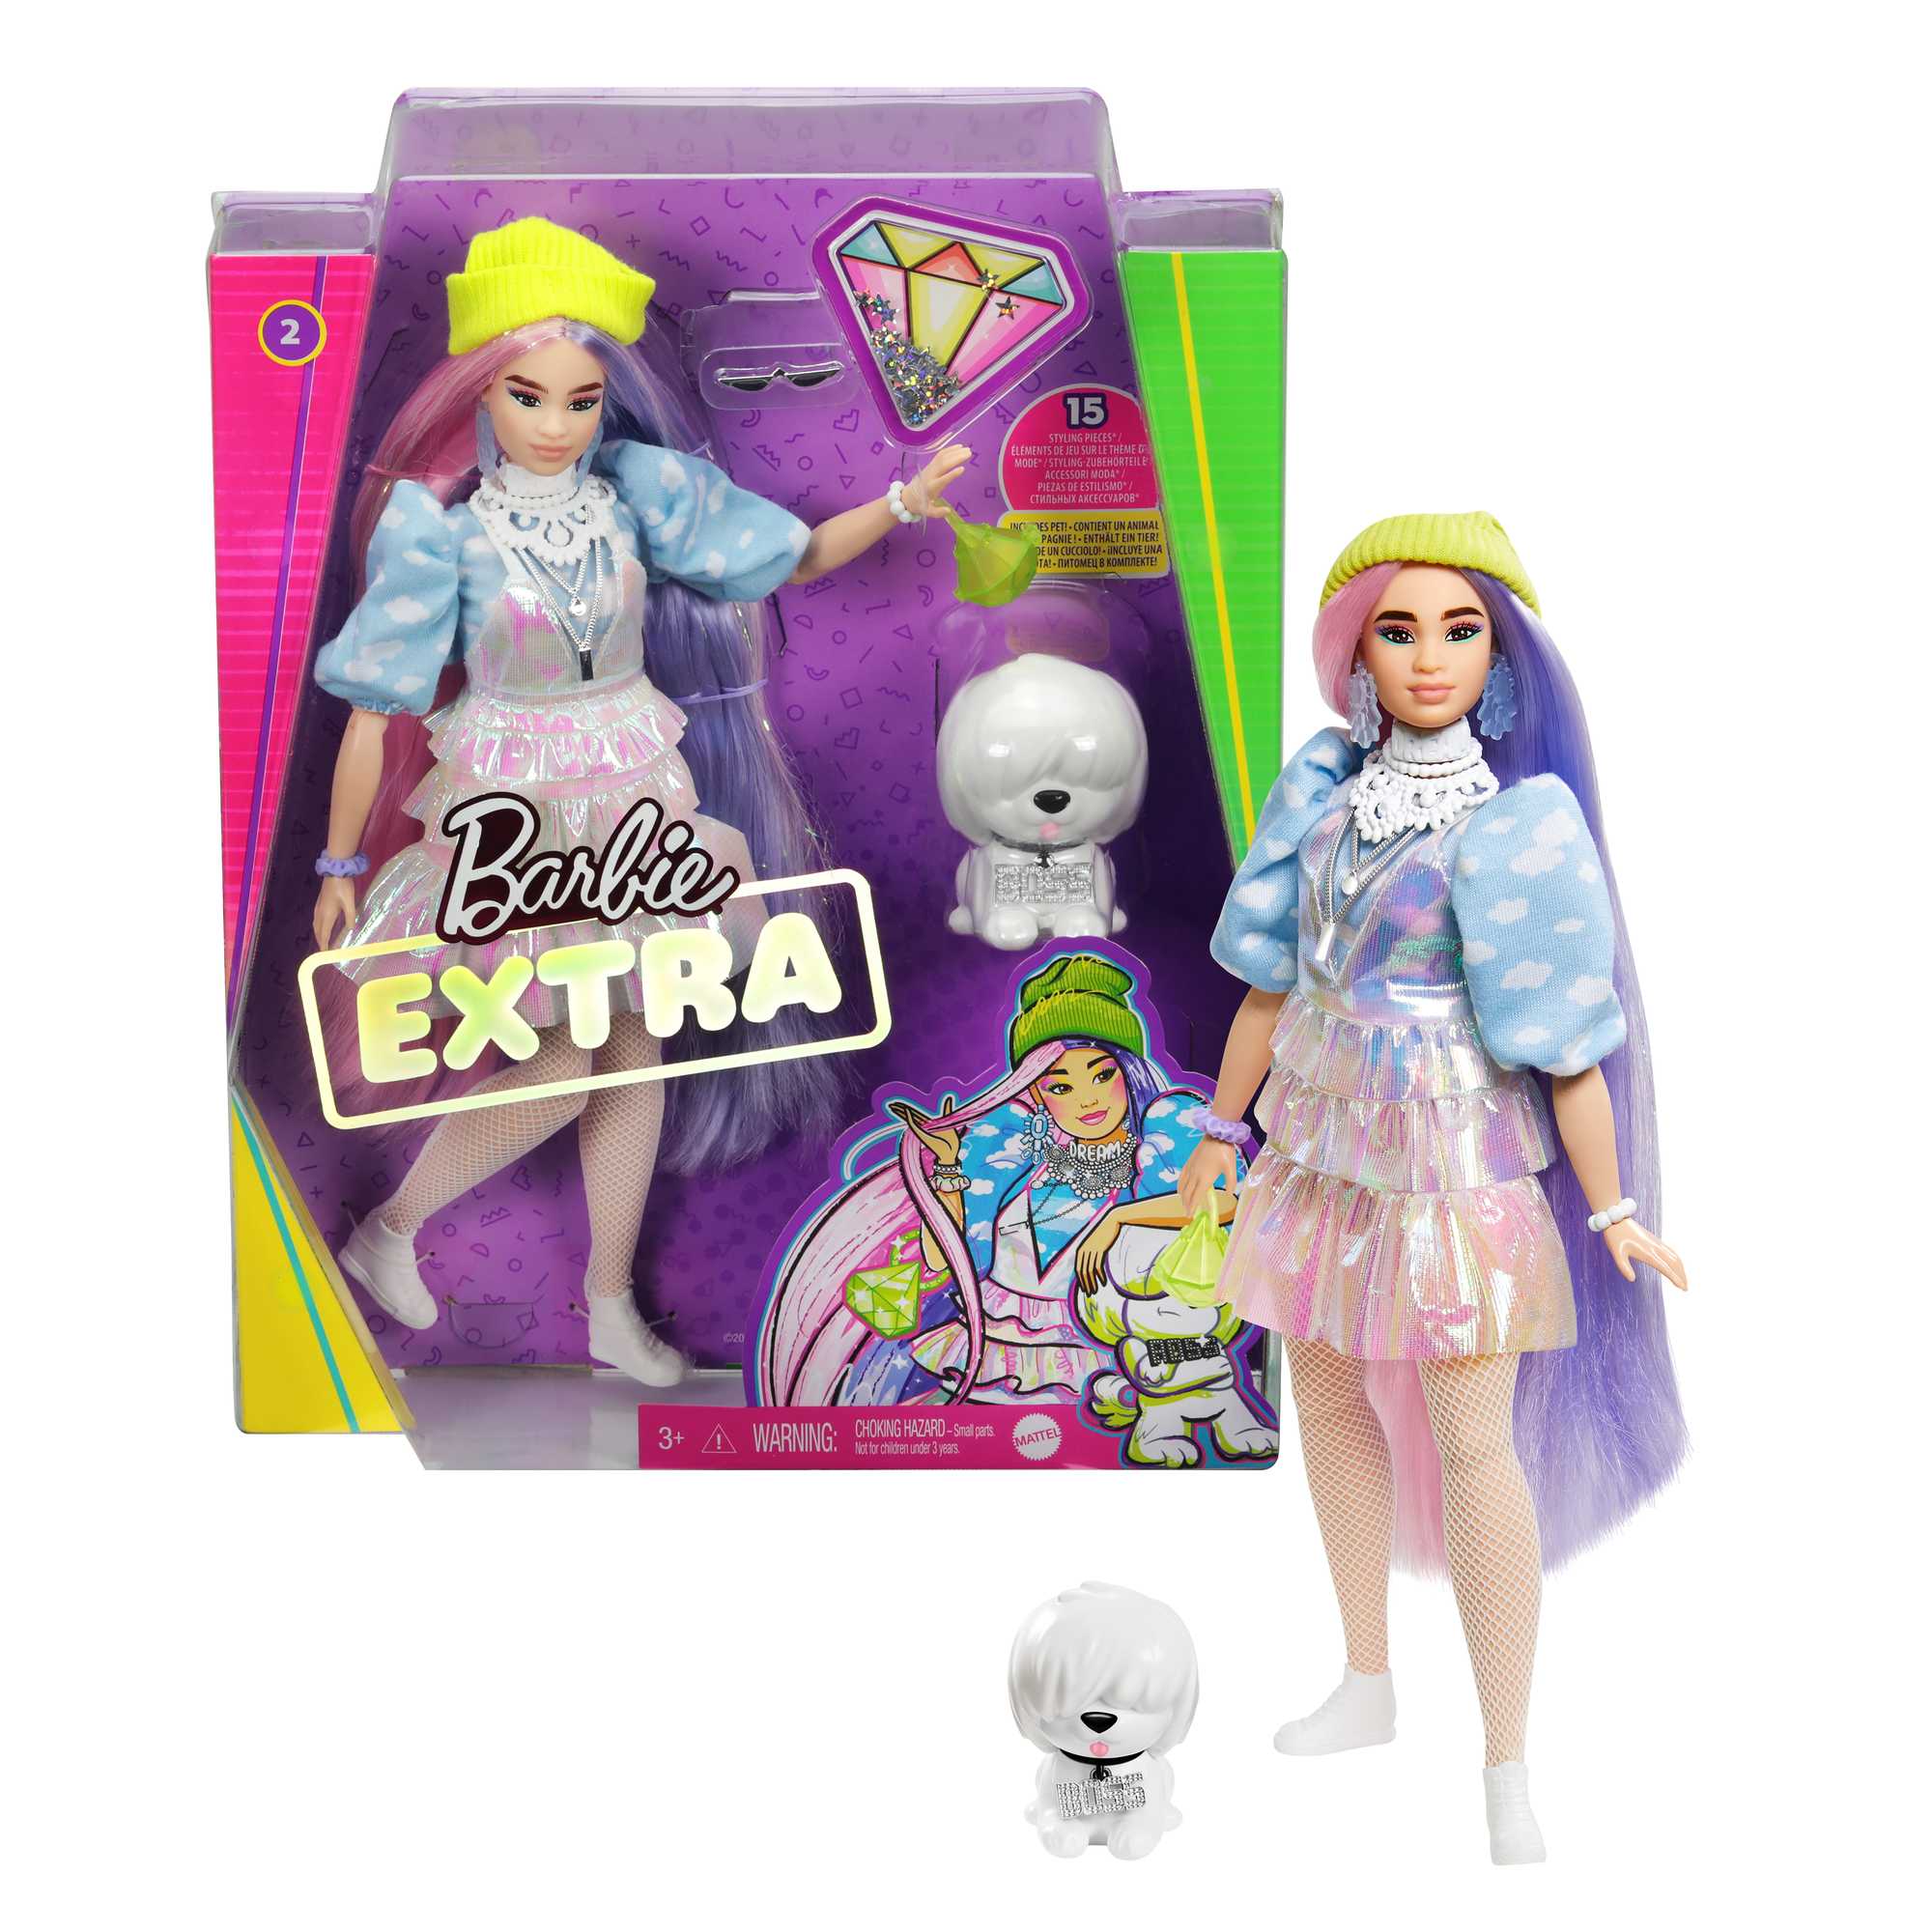 Barbie Extra Fashion Doll with Shimmery Look, Pink & Purple Fantasy Hair, Accessories & Pet - image 1 of 8